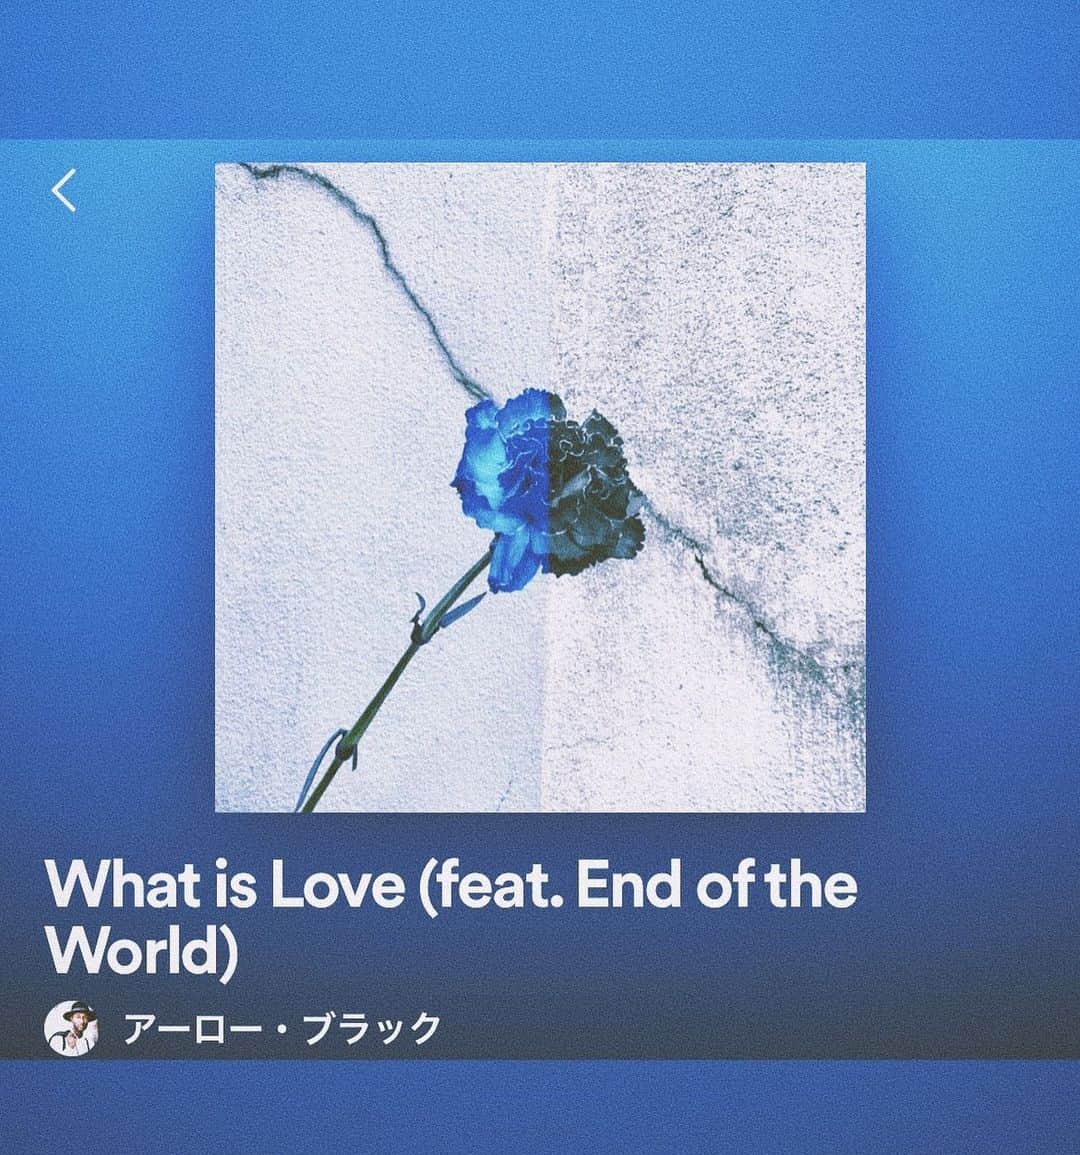 Saoriのインスタグラム：「I wrote this song during a really difficult time. Like everyone else, covid altered my whole life.   I couldn’t do the things I wanted to and couldn’t be near the people I cared about most.   Not being able to be around loved ones really made me think about the meaning of love itself.  I just kept thinking “what is love?”,  over and over.  That’s how this song came about, and writing it helped me so much.  Incredibly, Aloe Blacc loved the lyrics and lent his amazing voice to the song! I can’t thank him enough.  It’s a really important song for me.  この曲を作った時、 精神的に追い詰められていました。  コロナウィルスの蔓延によって今までのルーティンが崩れ、良かれと思ってやったことすら上手くいかず、仲間とも家族とも、良い関係を作るのが難しい時期でした。  What is Love? は、 その時の私の大きなテーマでした。 大事な人のそばにいることが辛い時、 愛とは何なのかと考えました。  そんな歌詞です。  信じられないことに、 アローブラックが私とプロデューサーで作った歌詞を気に入ってくれて、歌いたいと言ってくれました。  アローブラックが？？ あのアローブラックが？？  そう、あのアローブラックが、素晴らしい歌声で歌ってくれました。  大切な曲です。 ____  そして、End of the worldの 新曲を楽しみにしていてくれた皆さん、 延期の発表が遅すぎてごめんなさい。  運営チームに、コラー！！ って言いました。 発表どんだけ遅いねんっ！！ って言いました。  しばしお待ちを。」